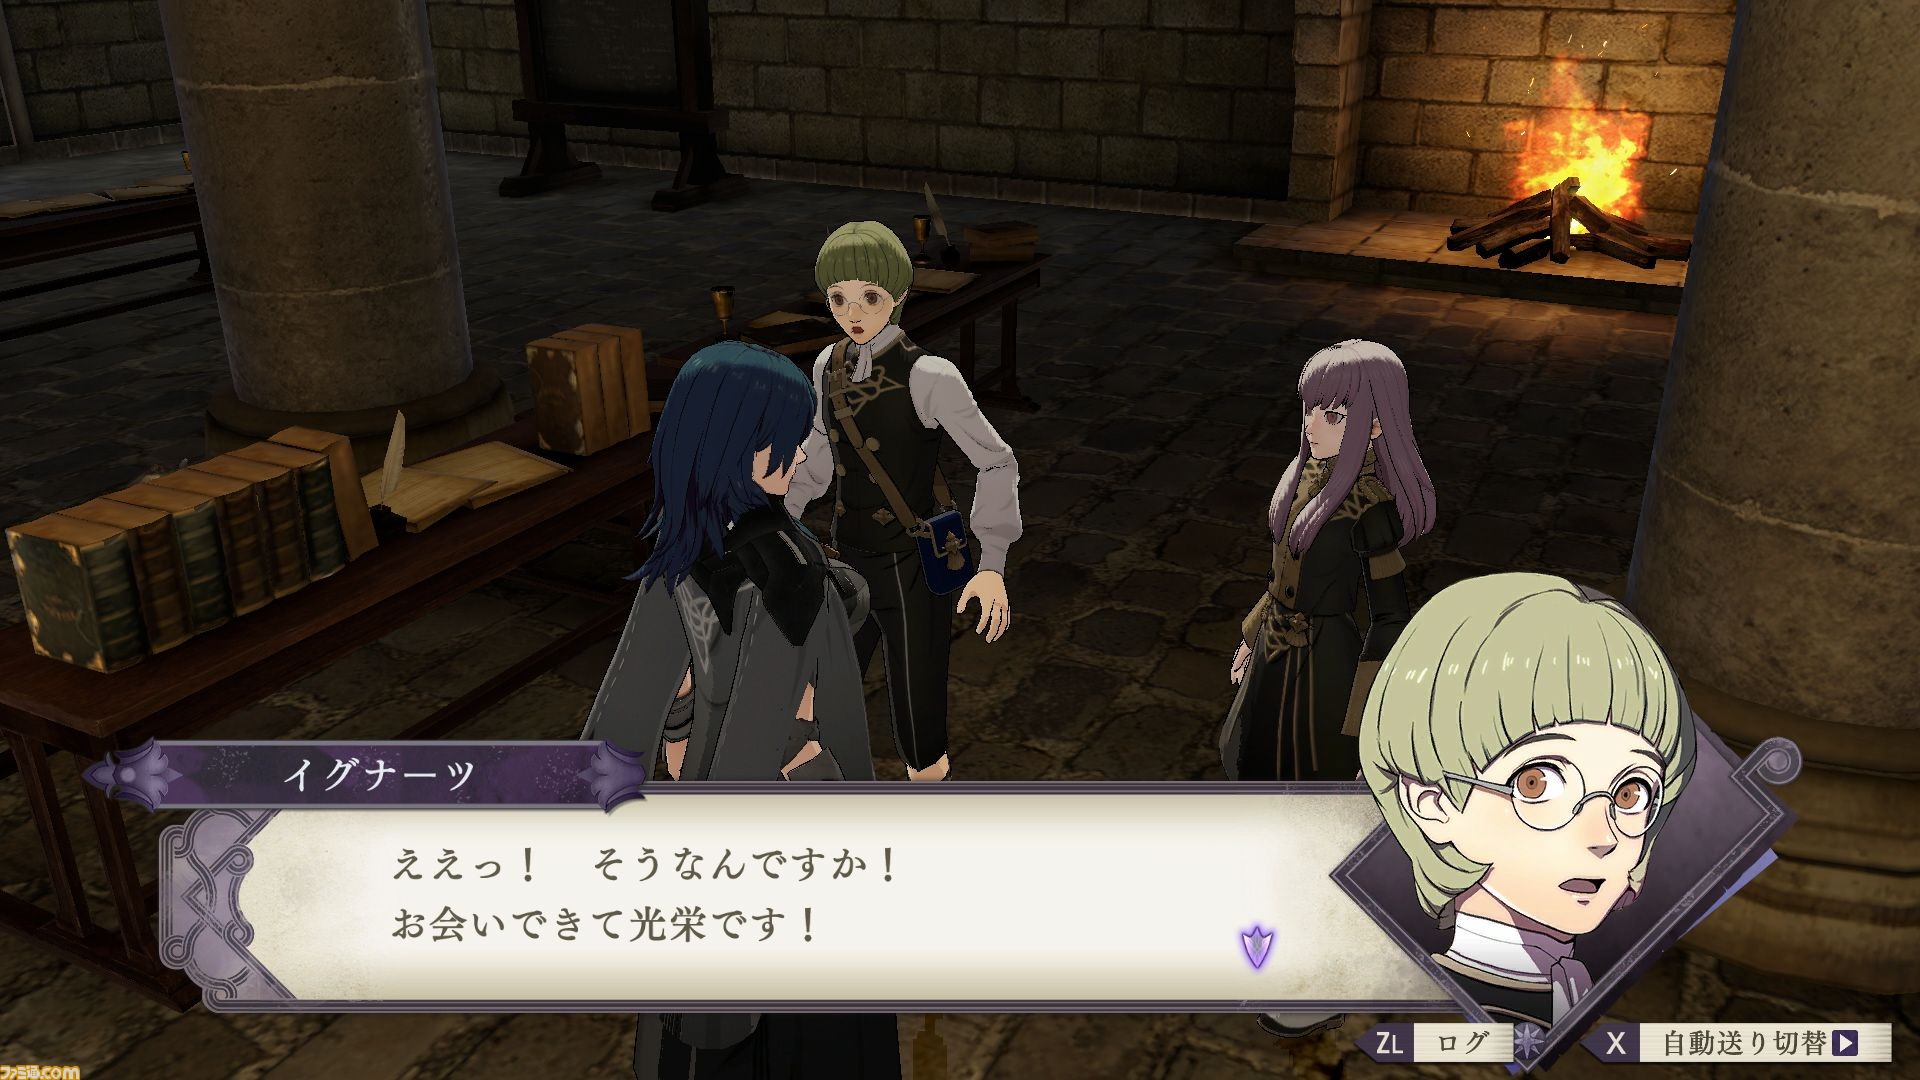 https://www.perfectly-nintendo.com/wp-content/uploads/sites/1/nggallery/fire-emblem-three-houses-25-04-2019-1/66.jpg